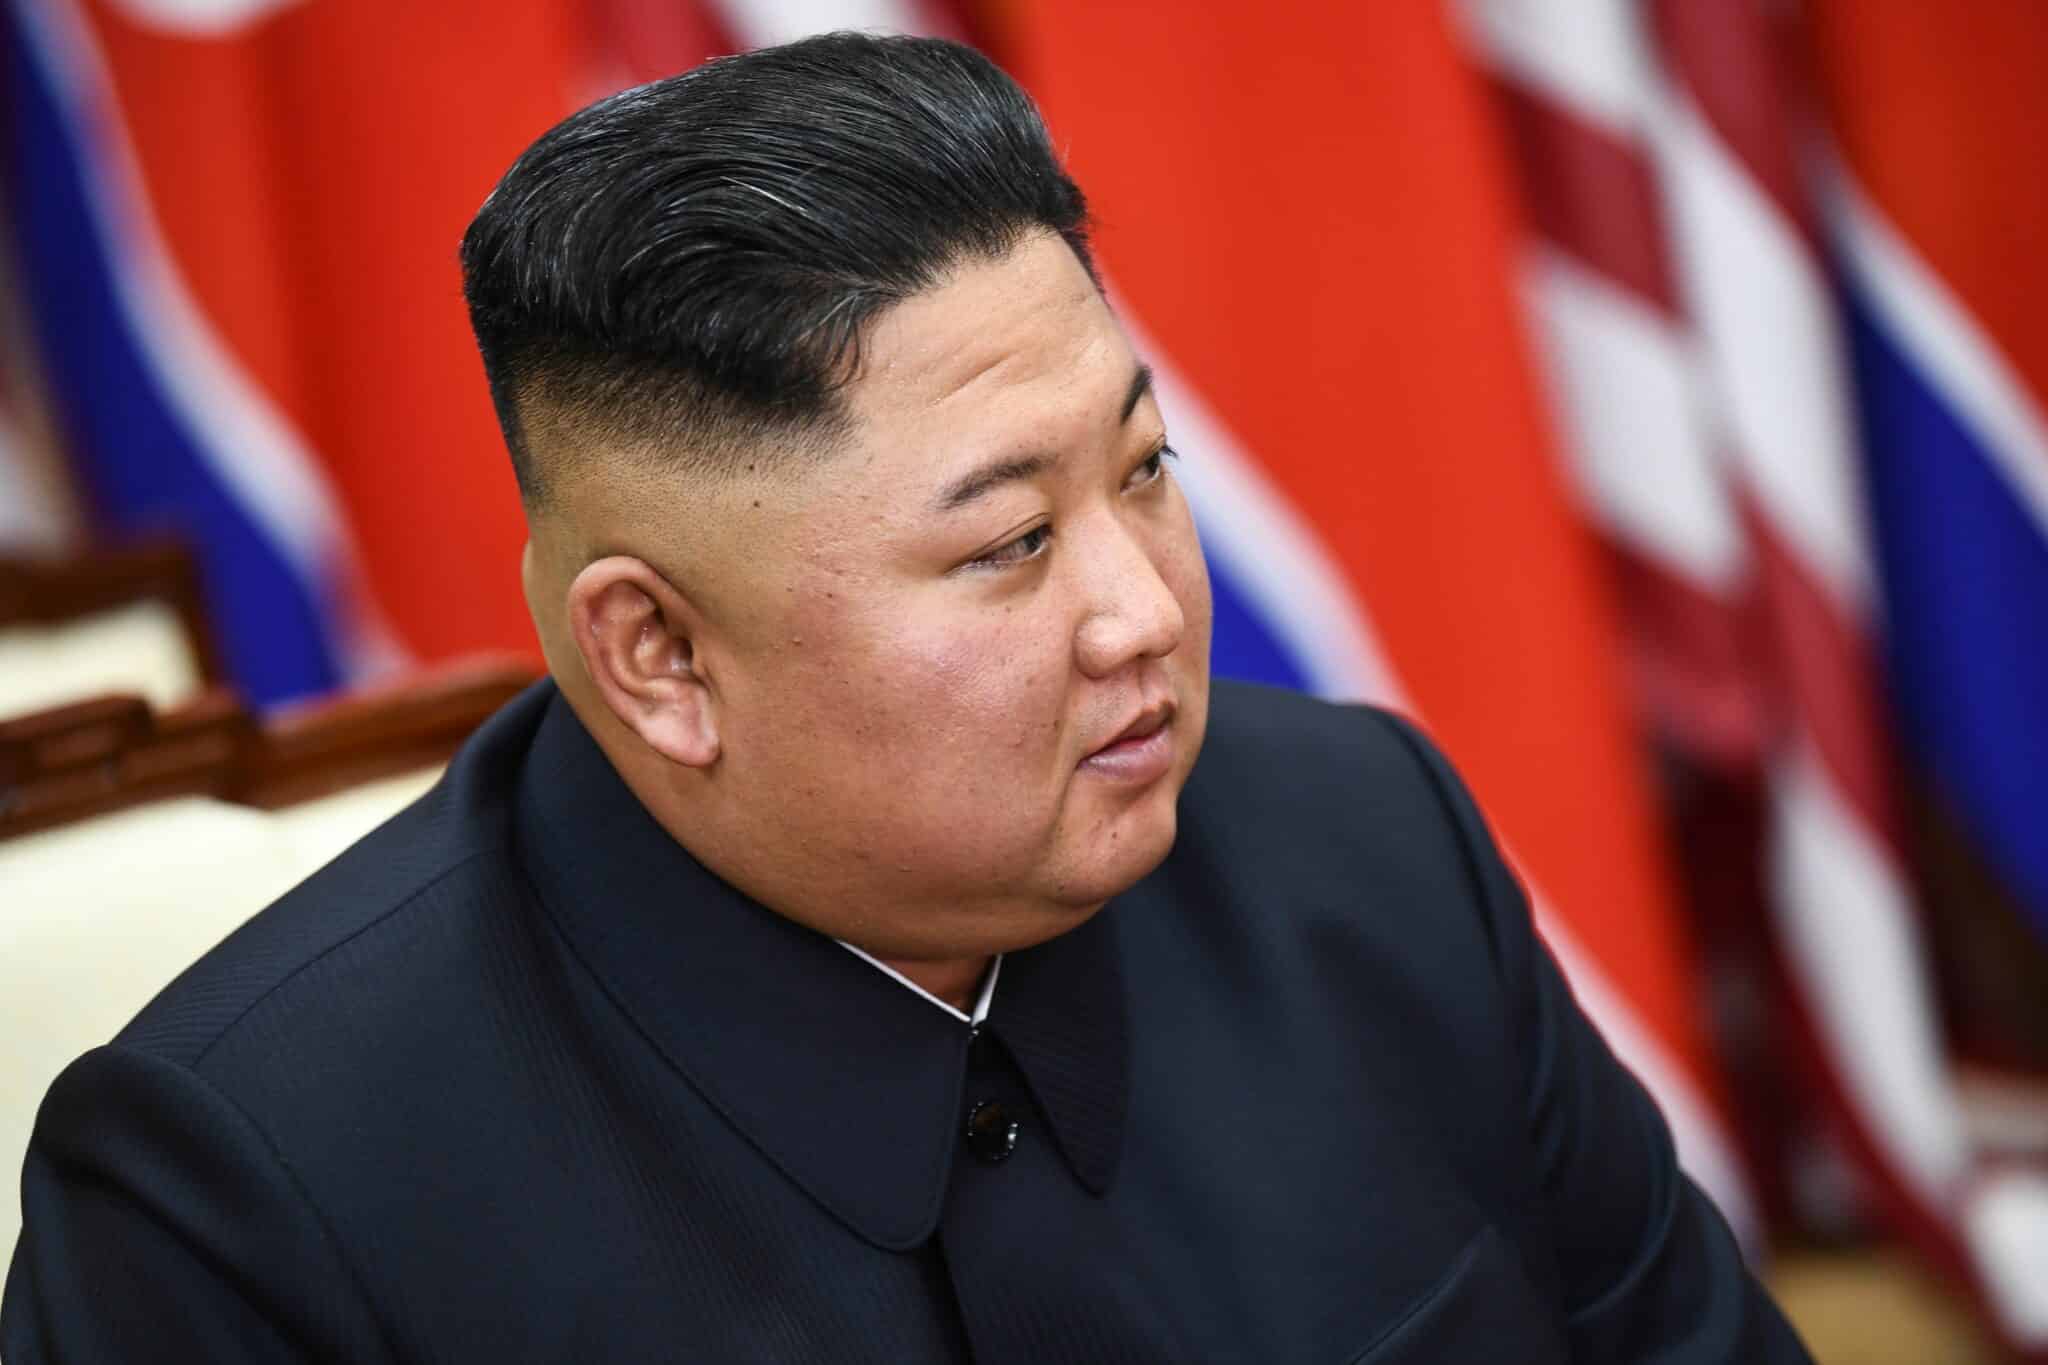 North Korea's leader Kim Jong Un attends a meeting with US President Donald Trump on the south side of the Military Demarcation Line that divides North and South Korea, in the Joint Security Area (JSA) of Panmunjom in the Demilitarized zone (DMZ) on June 30, 2019. (Photo by Brendan Smialowski / AFP)        (Photo credit should read BRENDAN SMIALOWSKI/AFP via Getty Images)